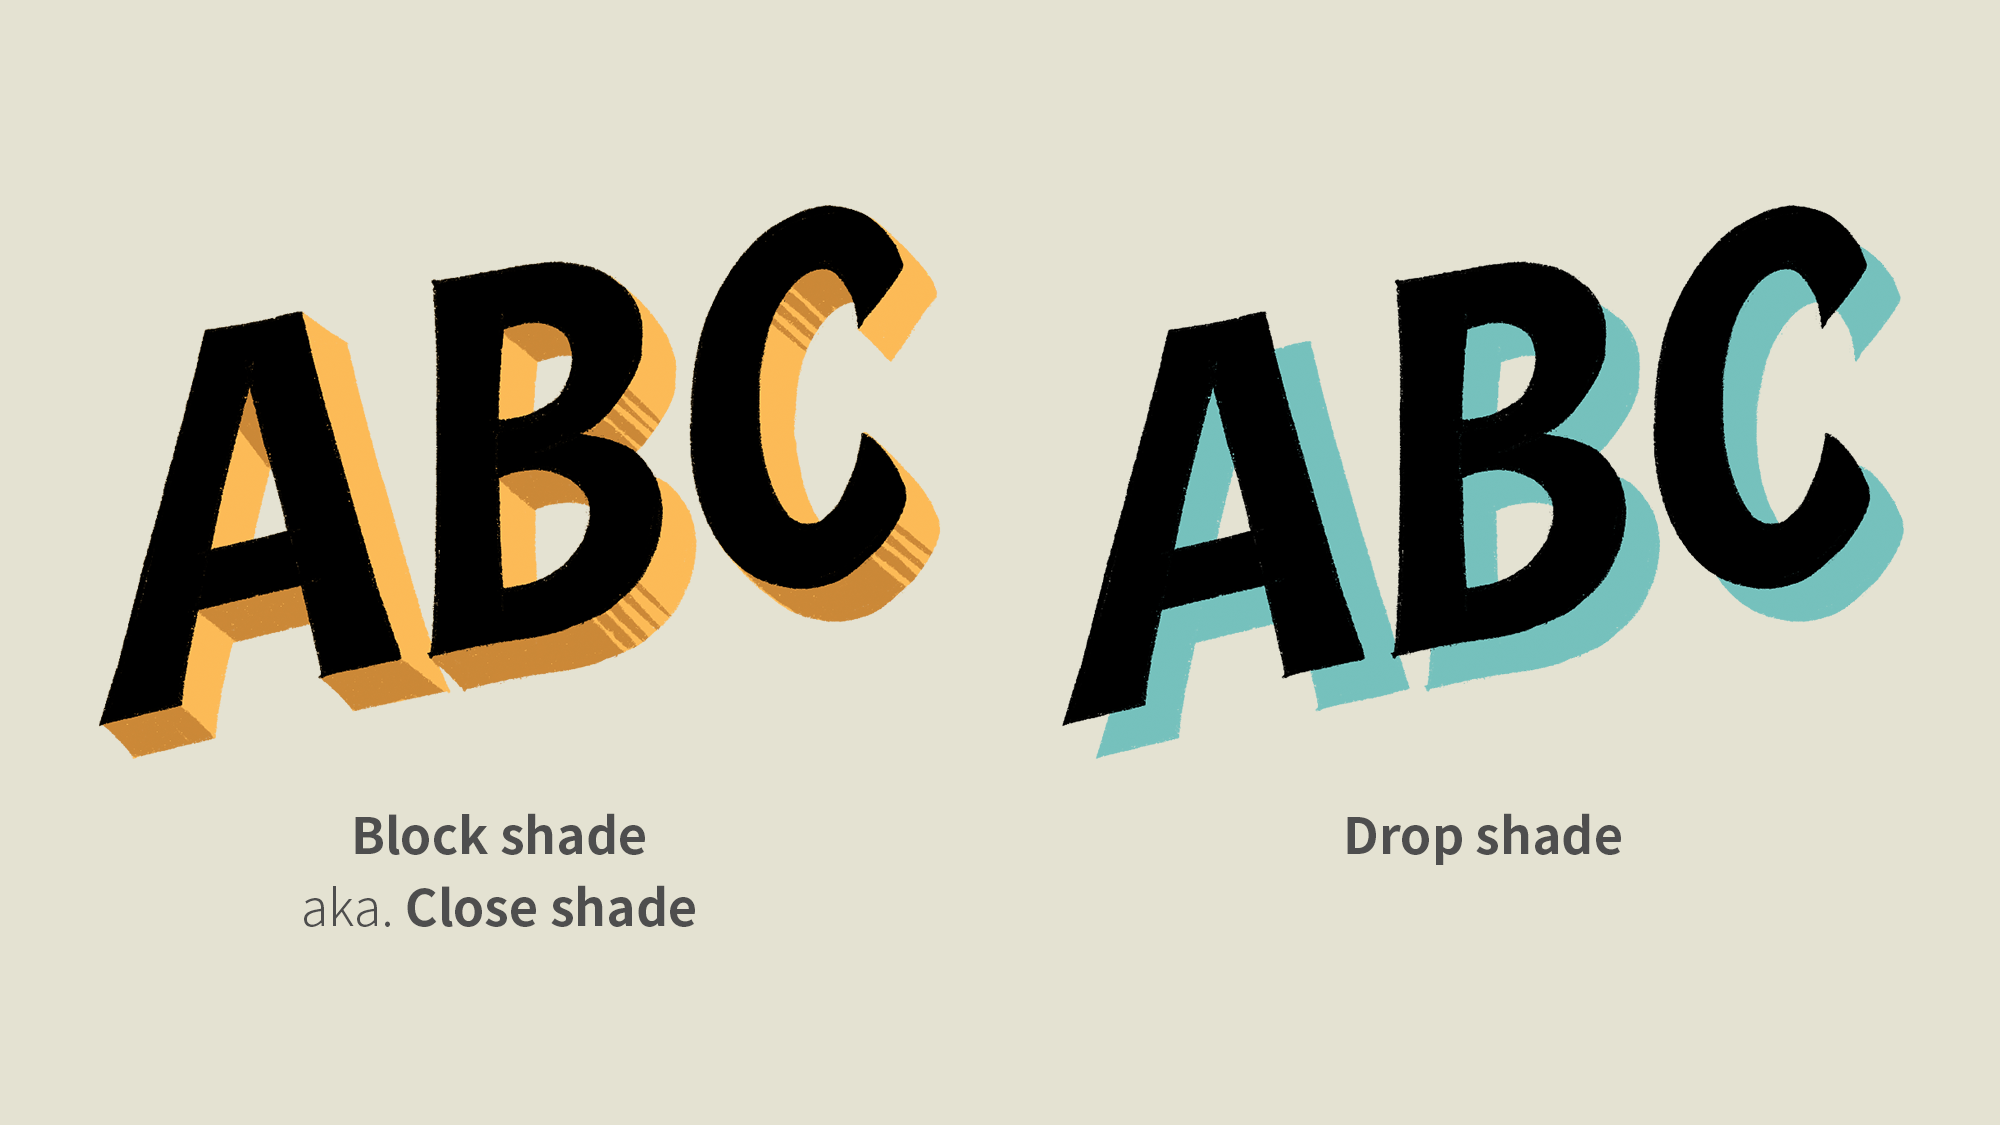 ABC shown with different types of shade effect.